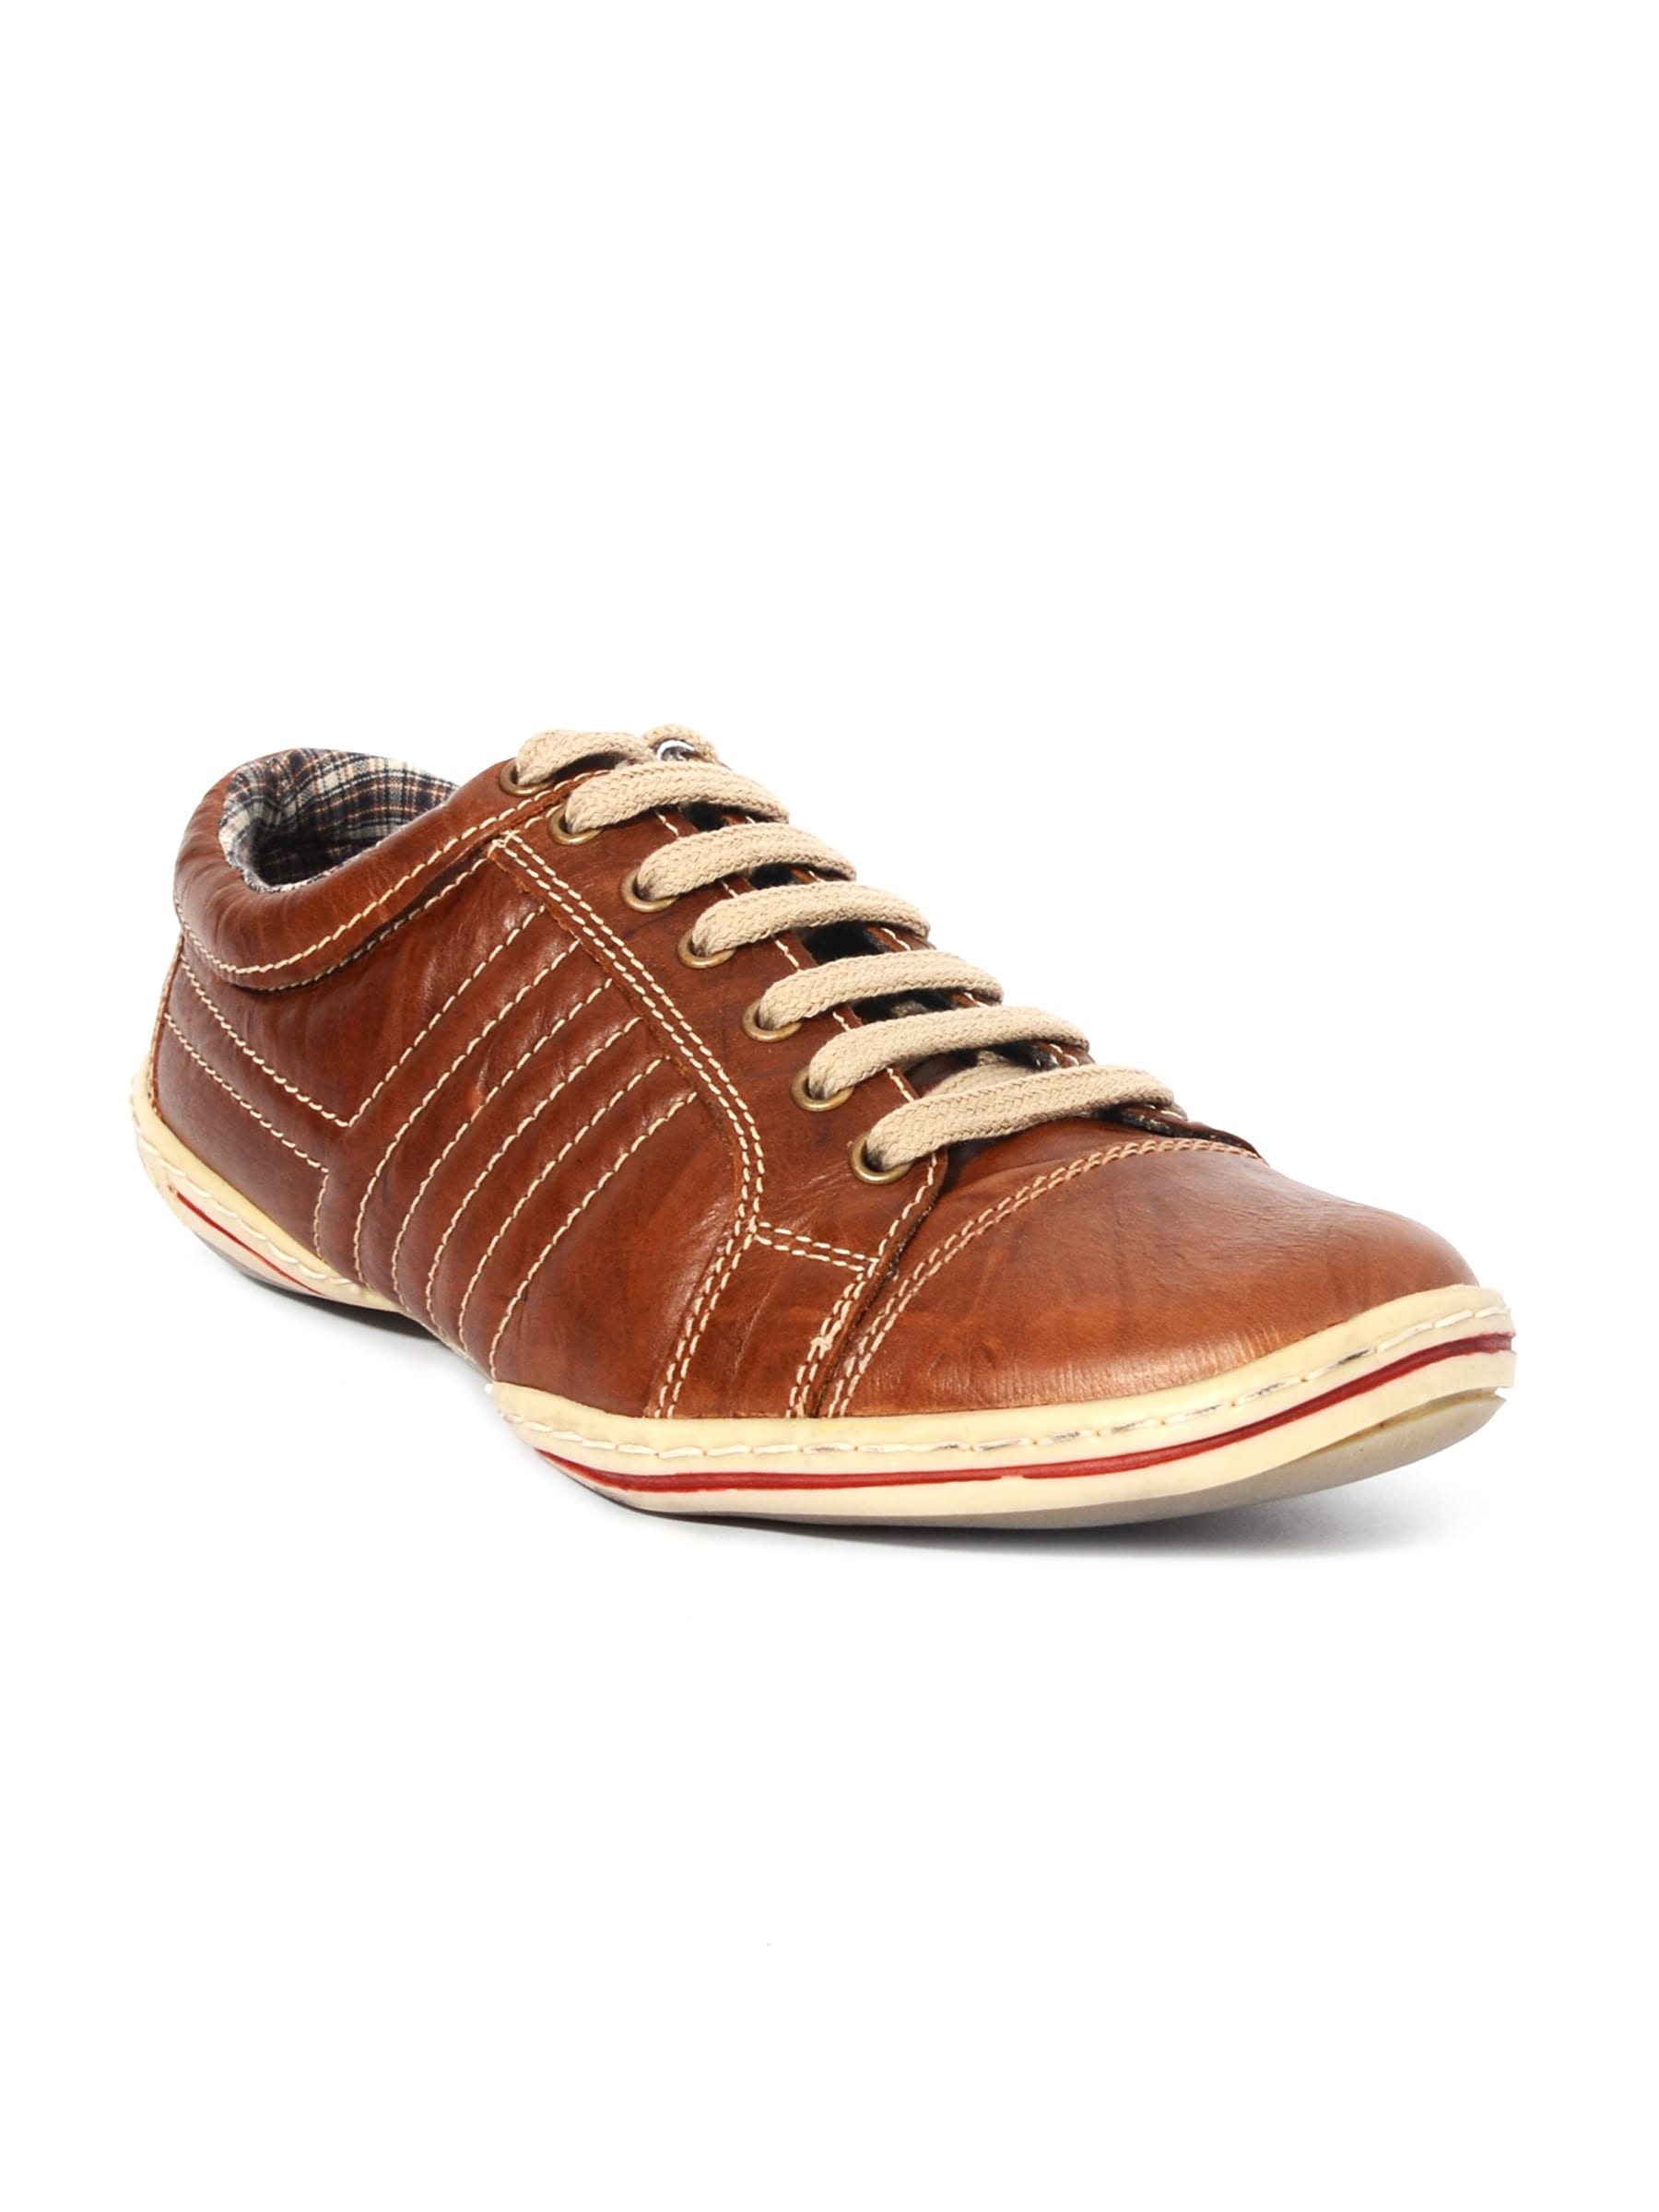 Red Tape Men's Casual Brown Shoe